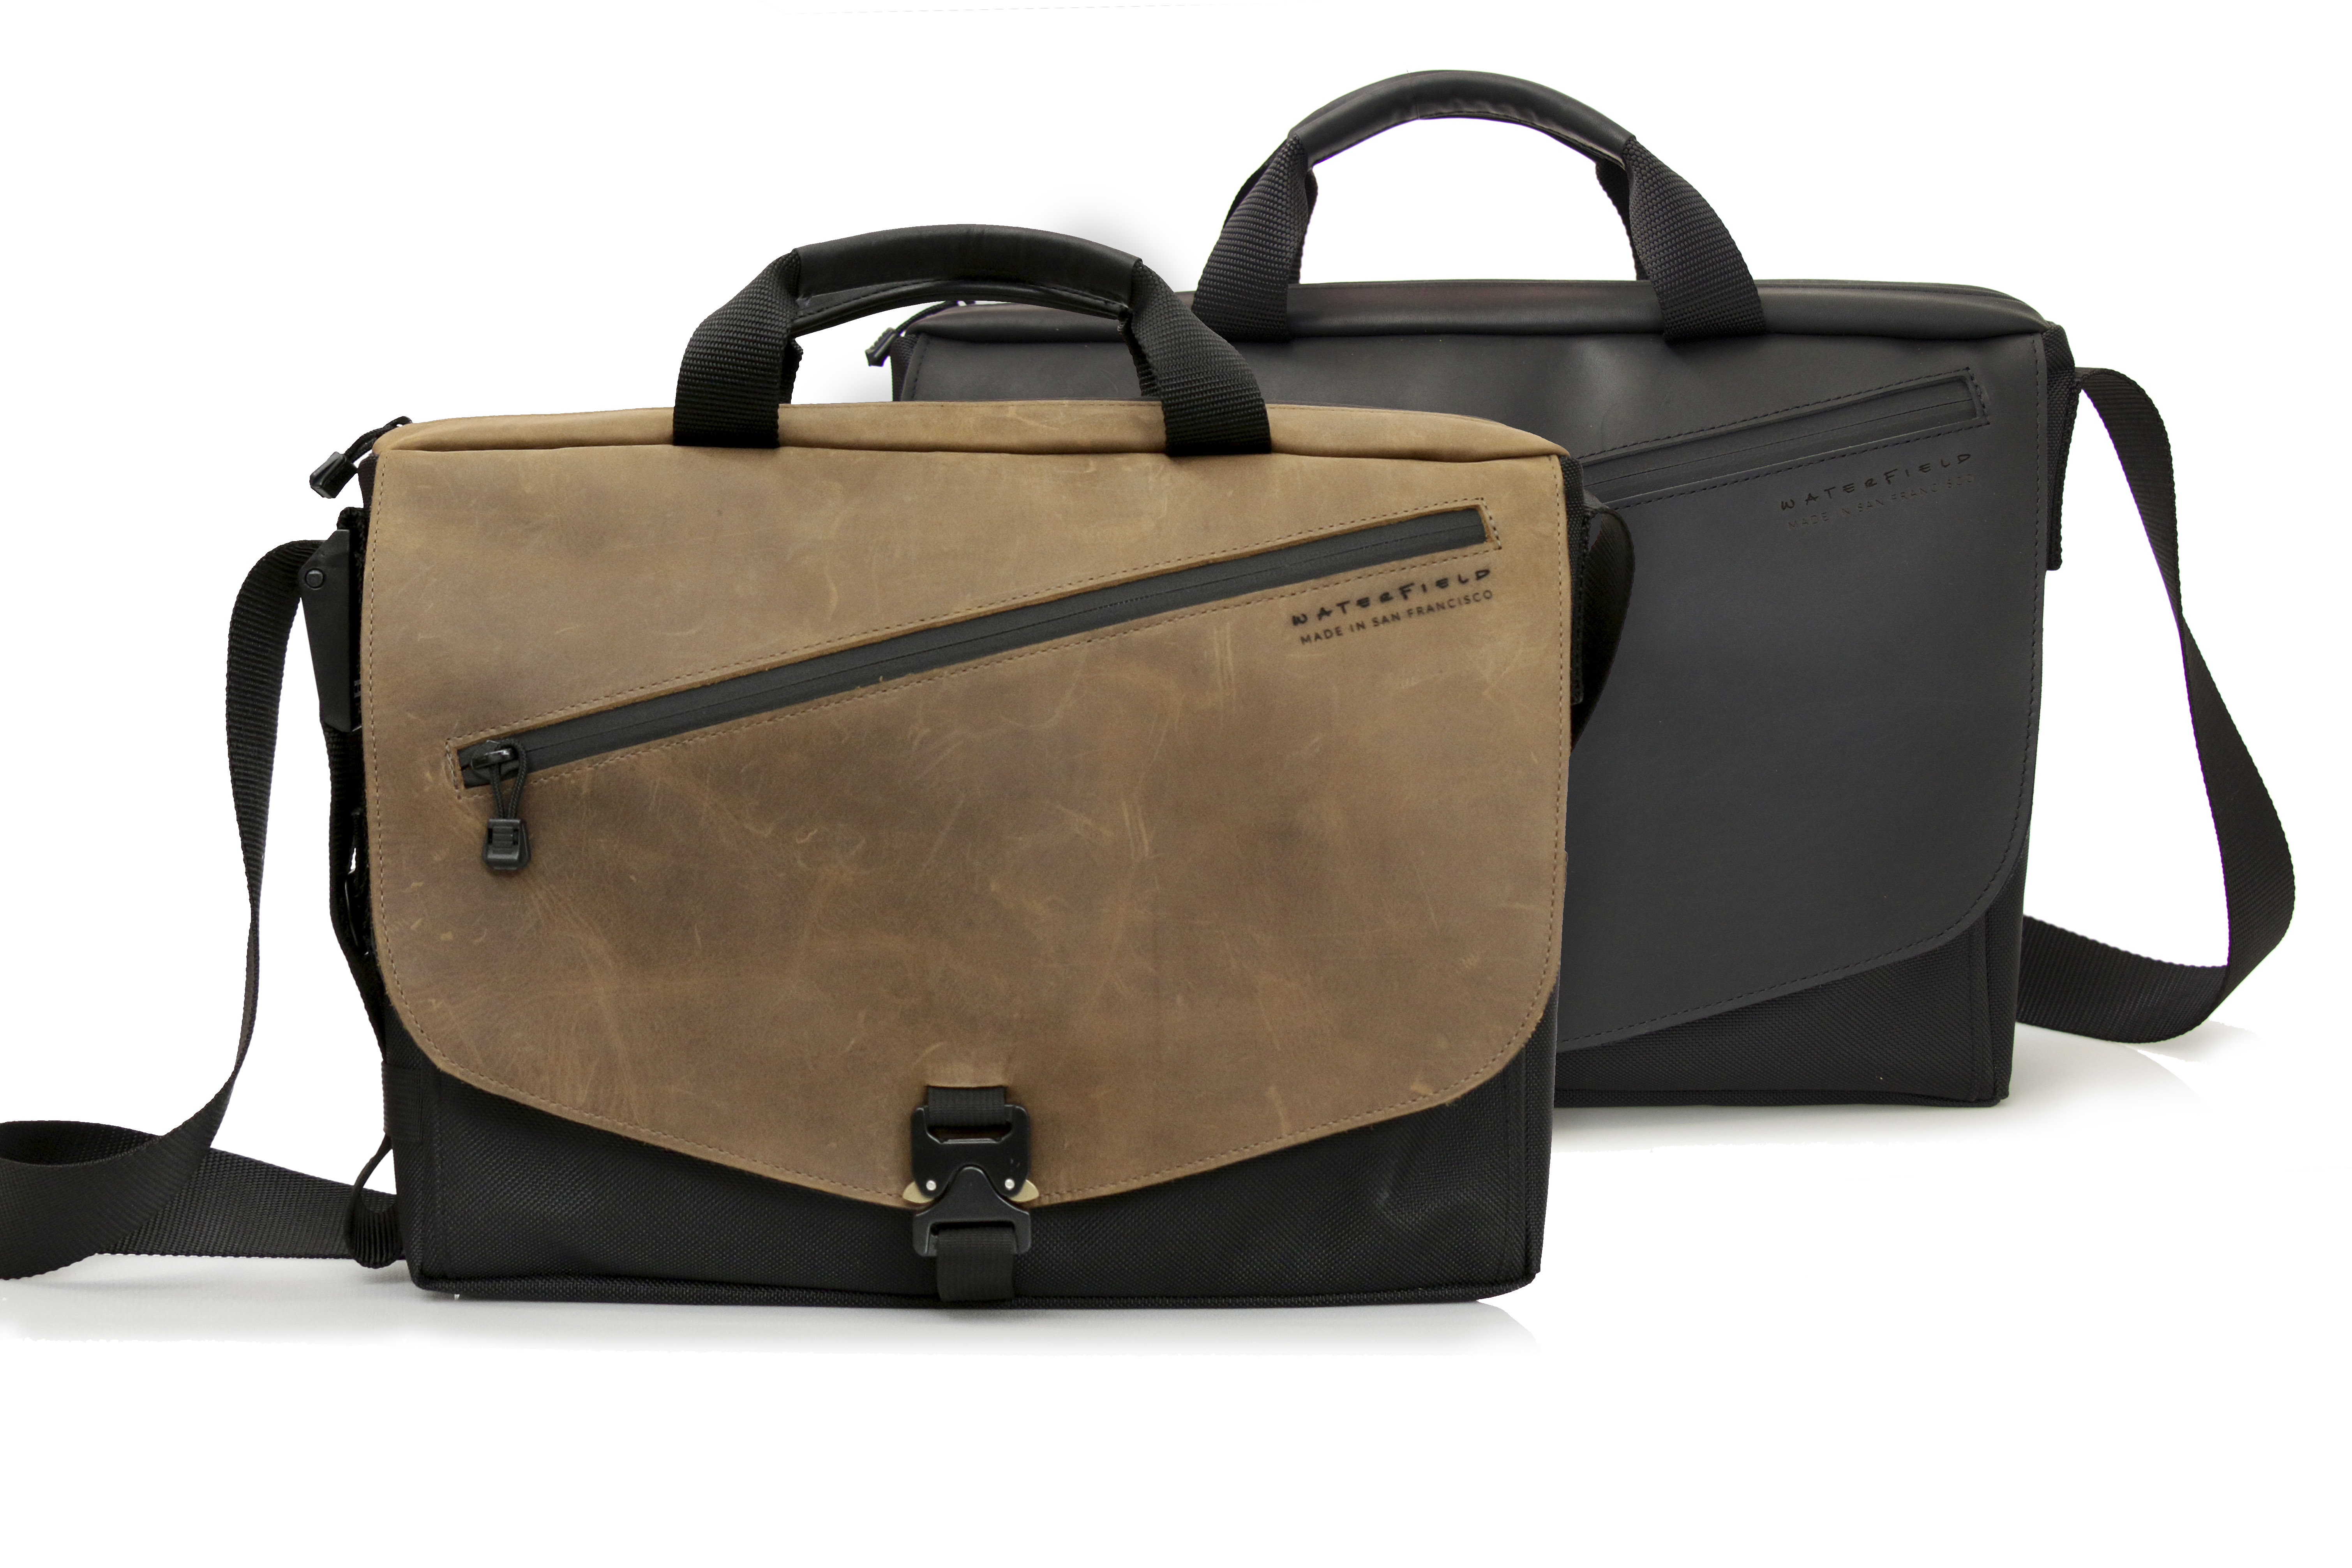 The New! Cargo Bag